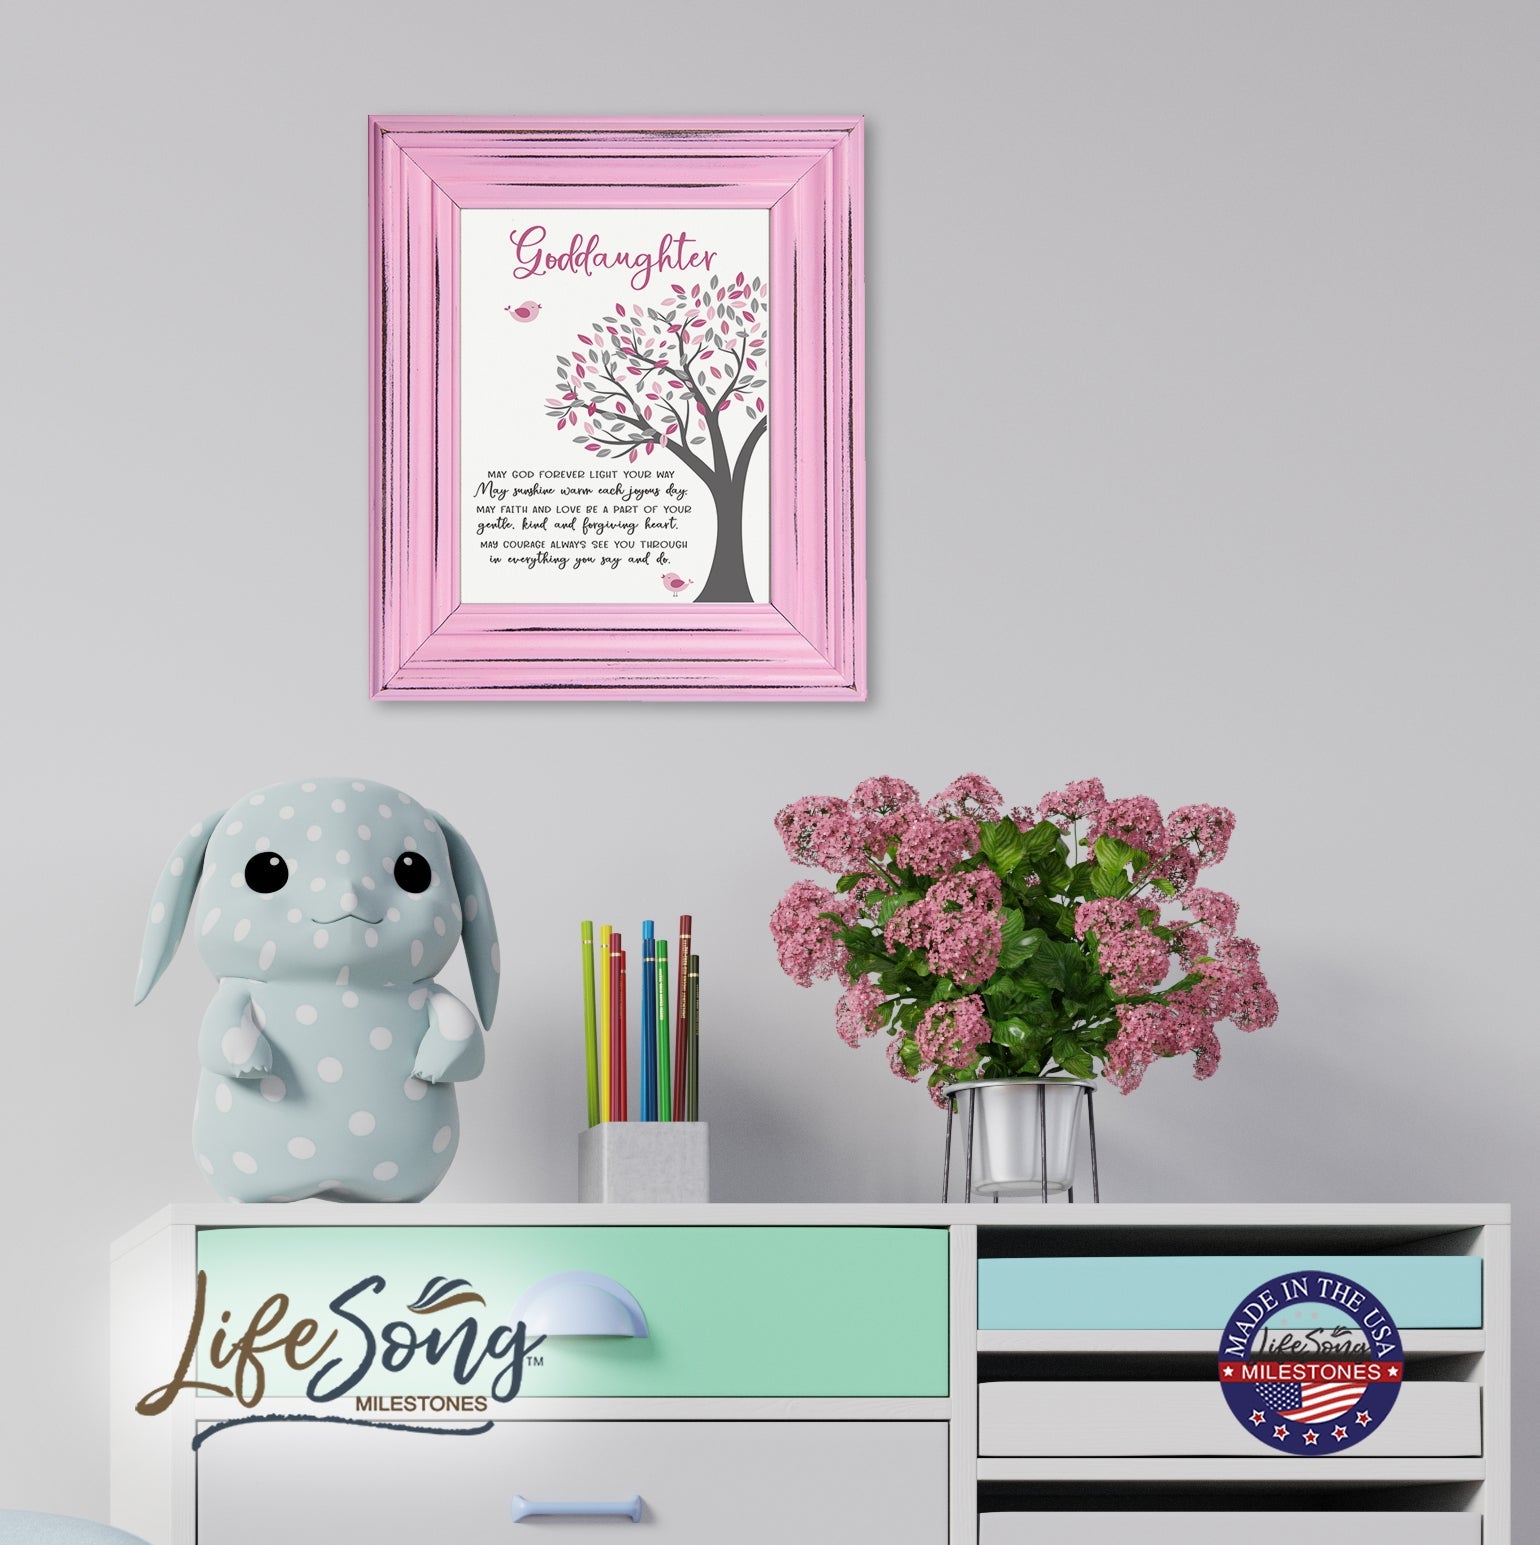 Godchild Framed Wall Signs - May God Forever - LifeSong Milestones